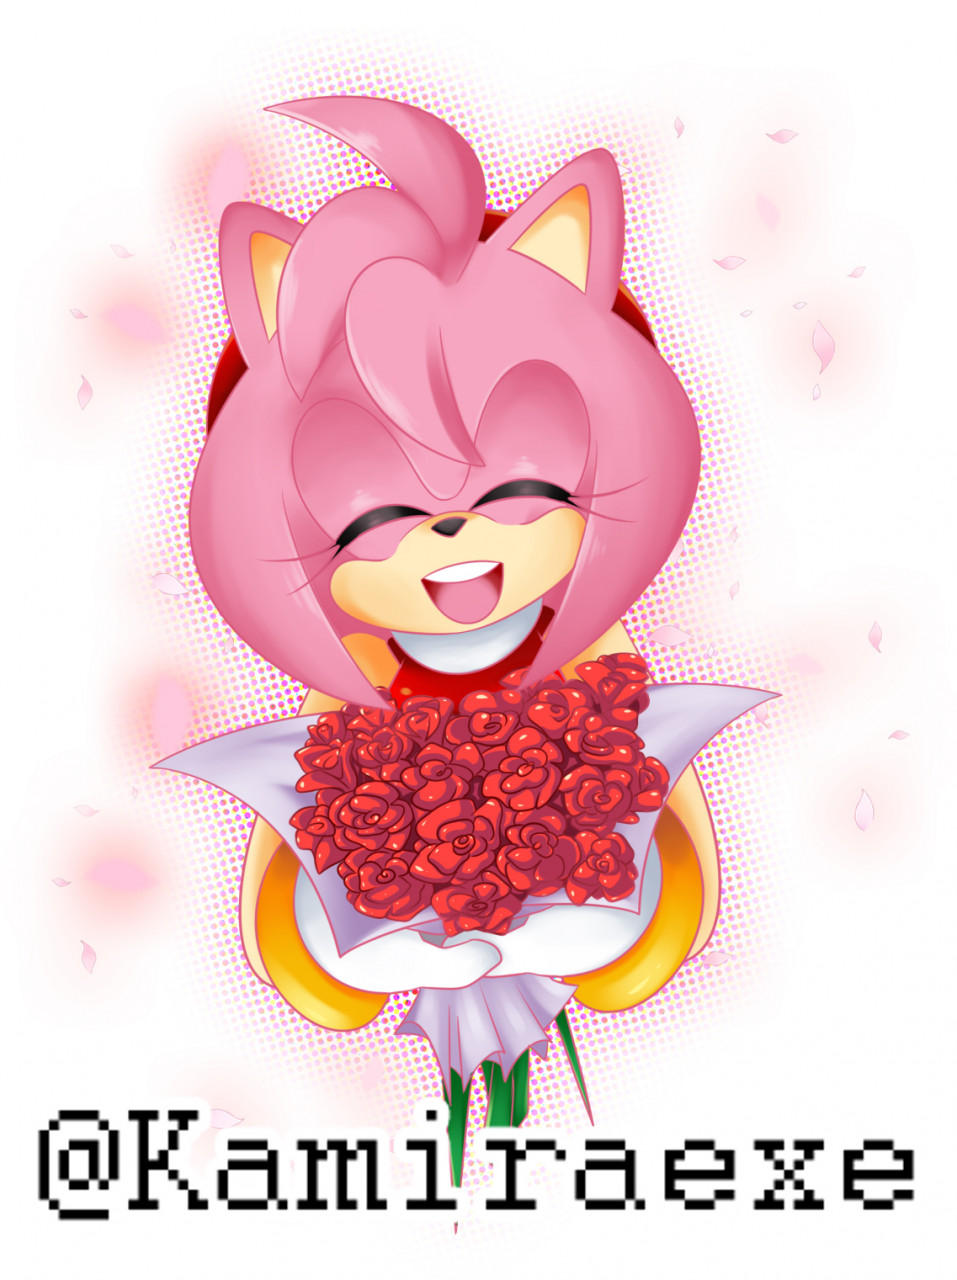 Rita 🌸 on X: Sonic and Amy Rose wishes you a very Happy New Year